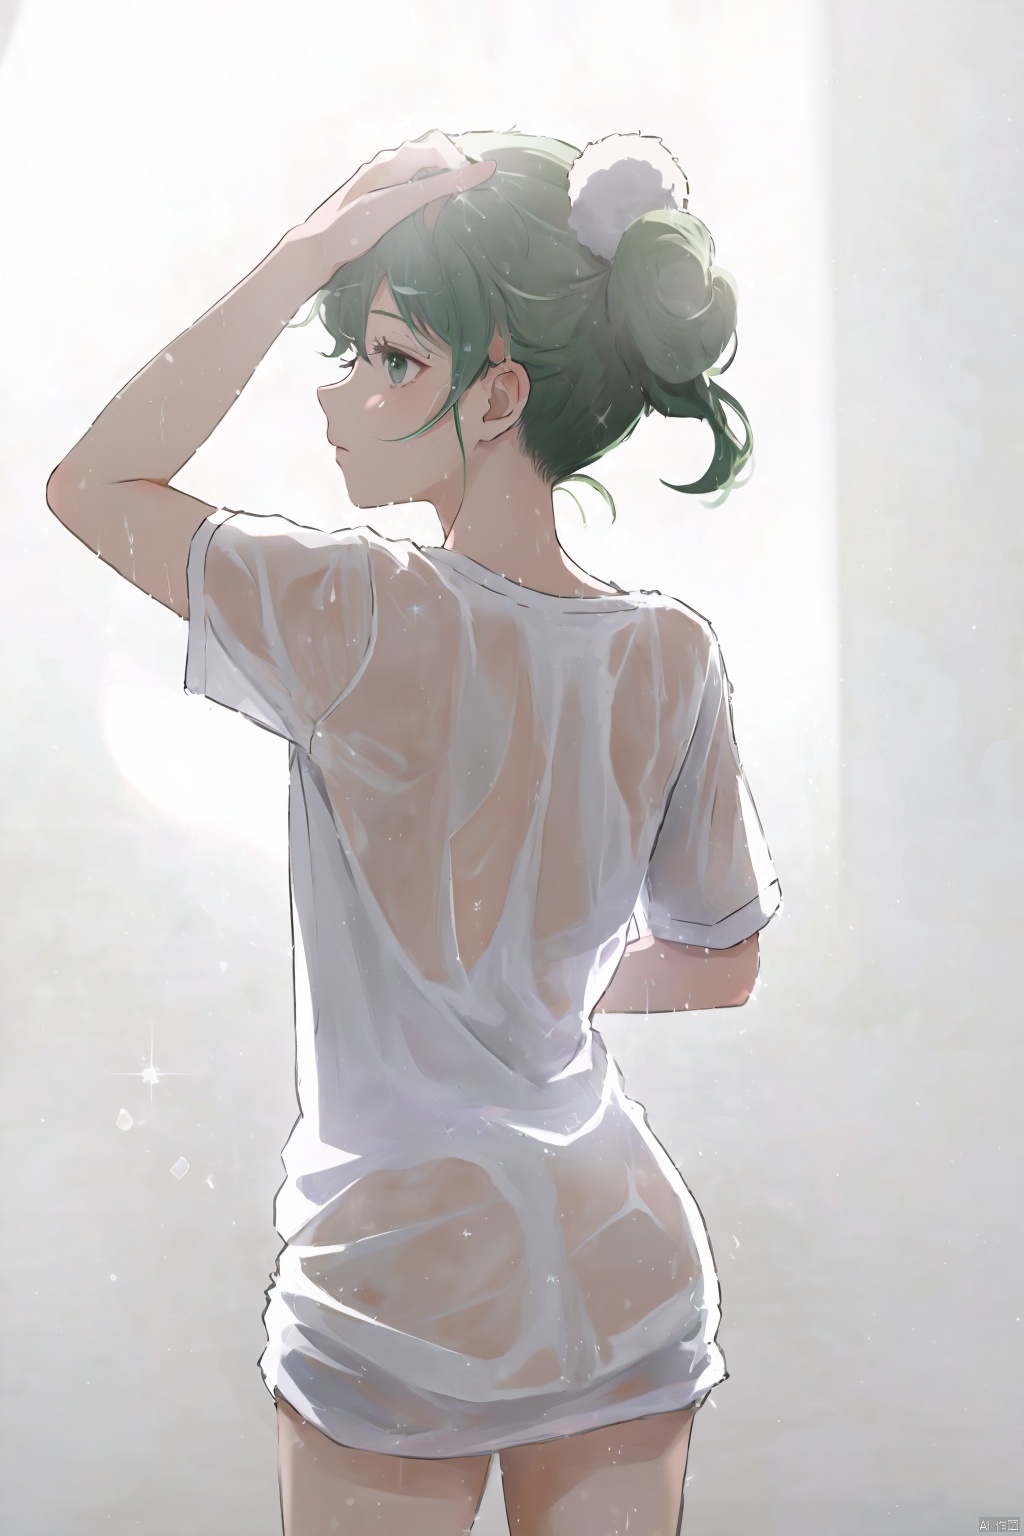  1 girl, focus, solo, looking back, looking from behind, taking off clothes, shirt, white background, white shirt, looking at the audience, green eyes, boyfriend, cozy anime, See thru wet T shirt, soft